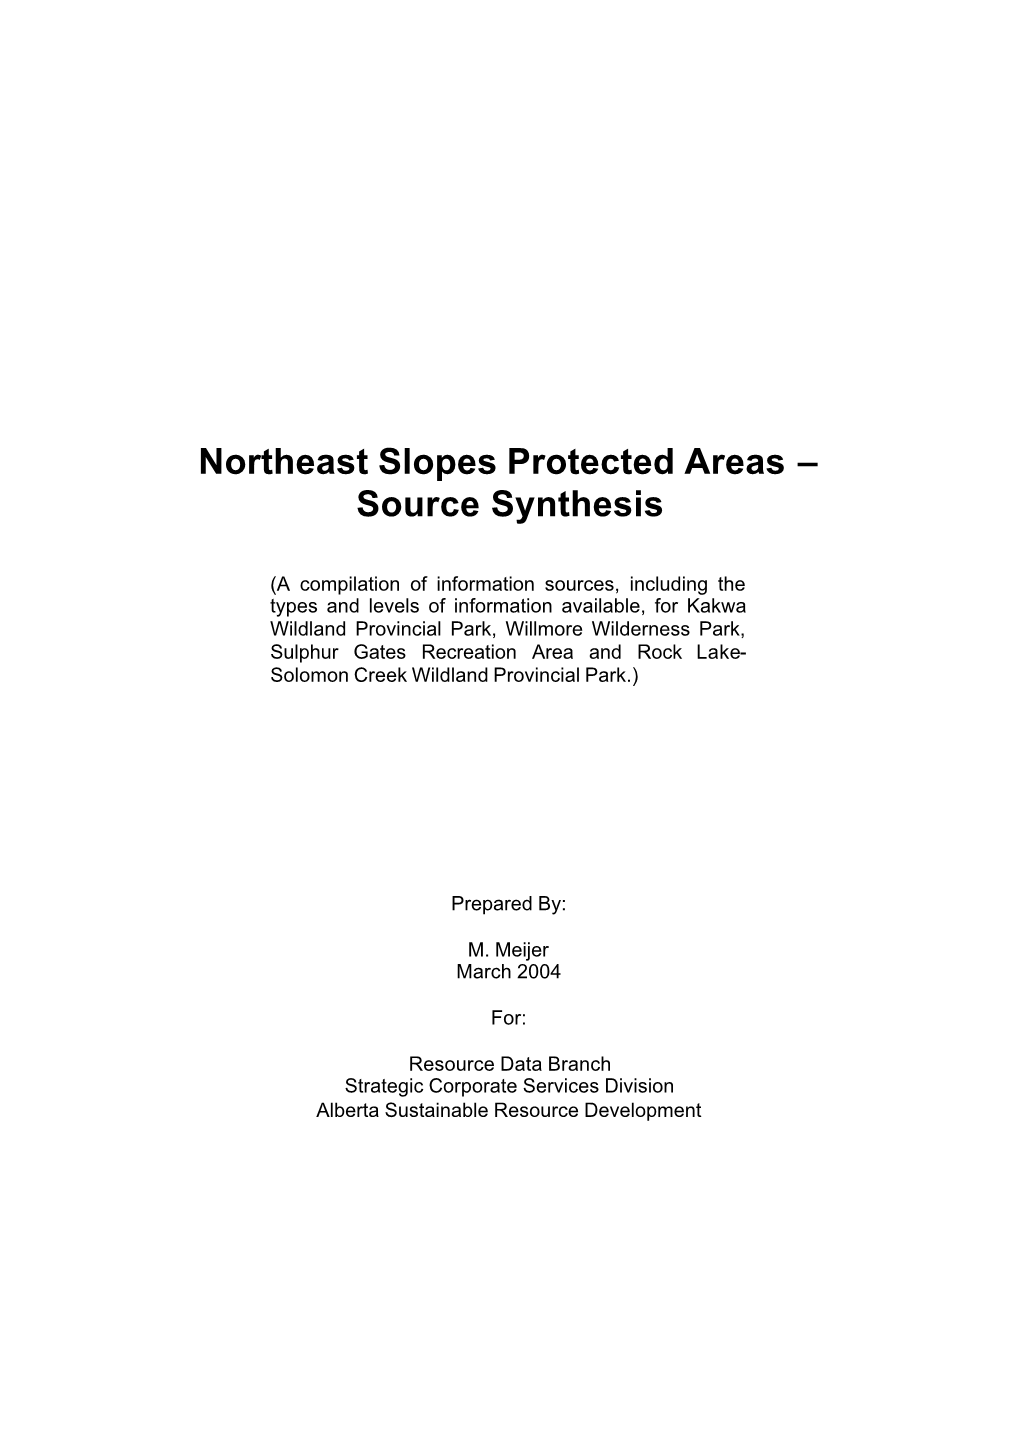 Northeast Slopes Protected Areas – Source Synthesis